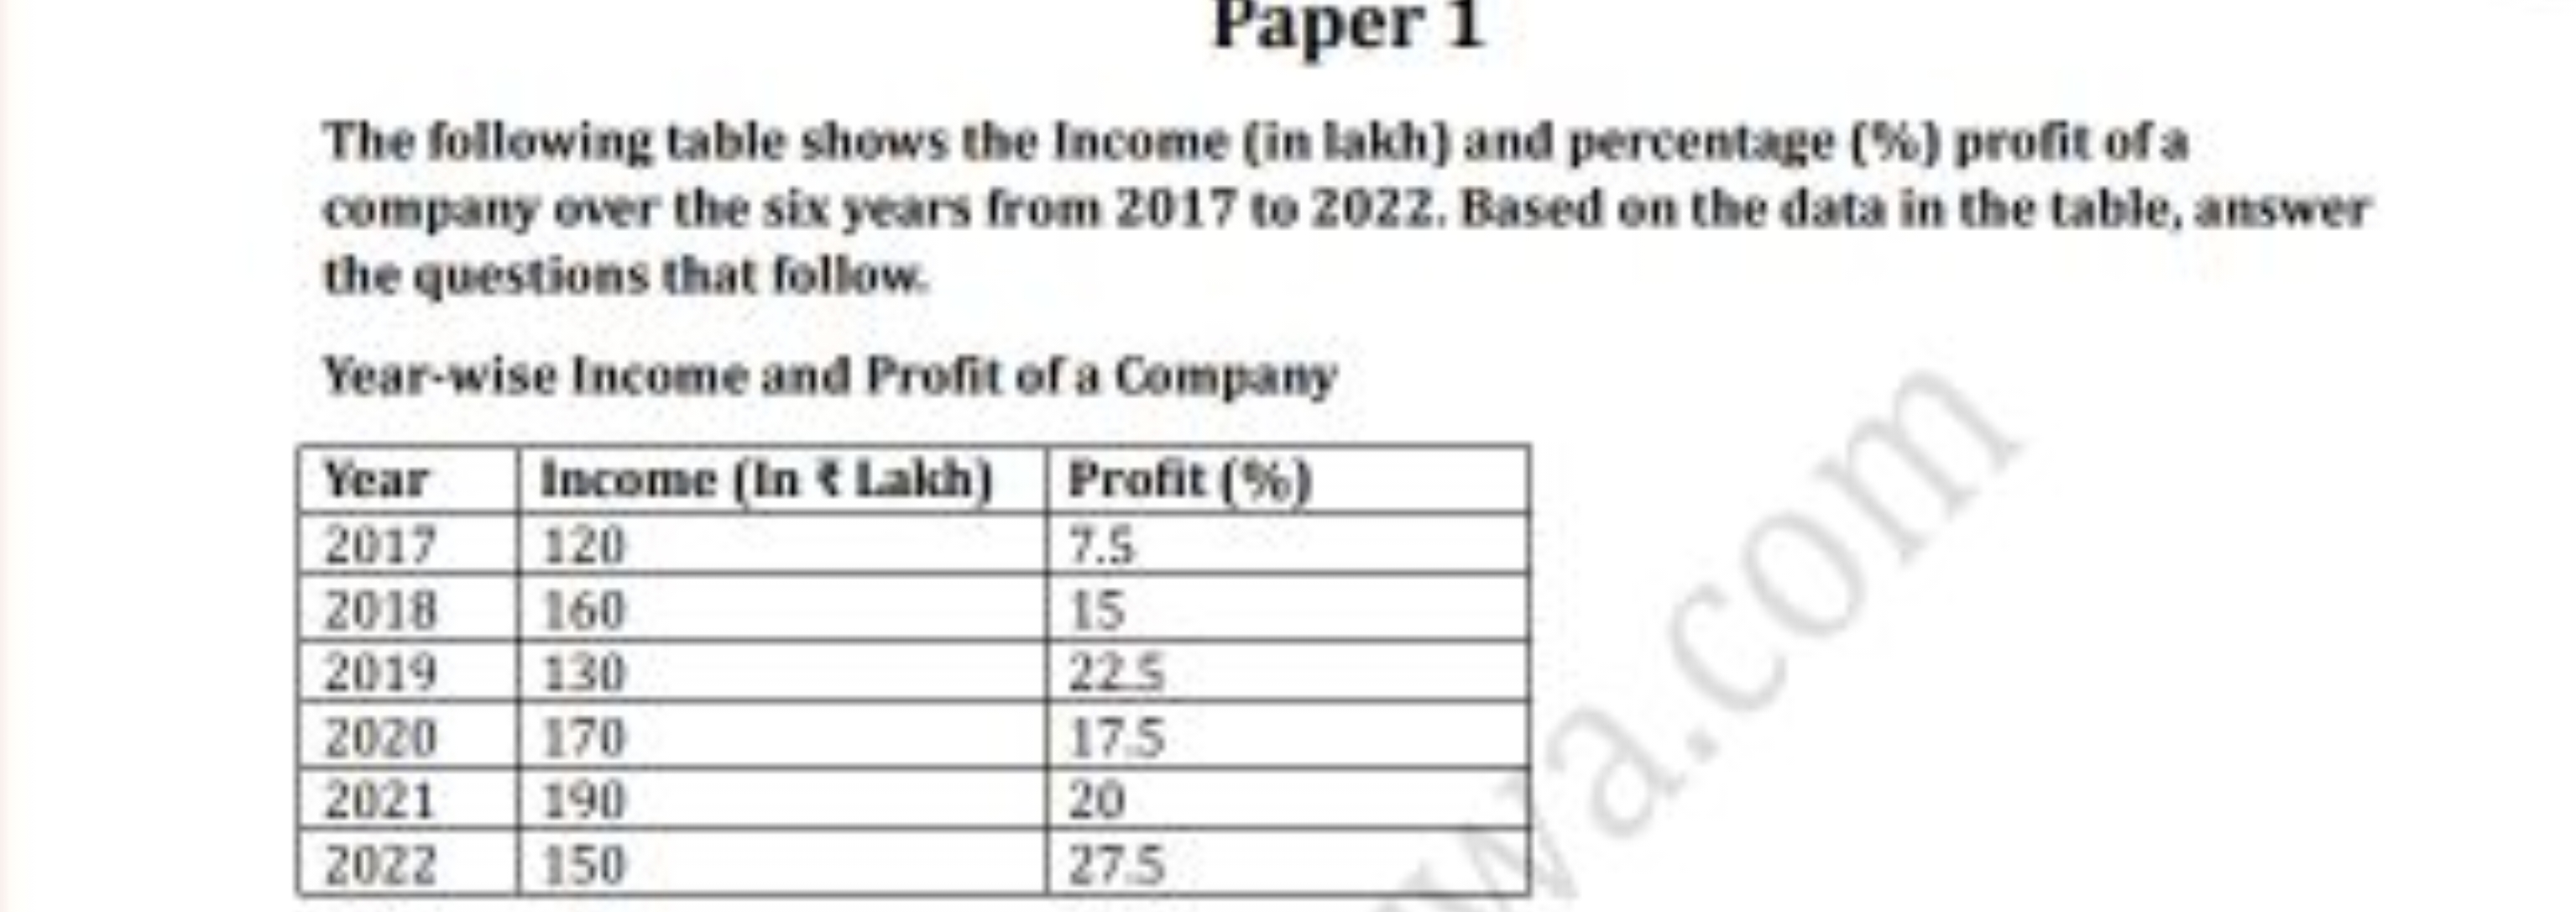 Paper 1
The following table shews the Income (in lakh) and percentage 